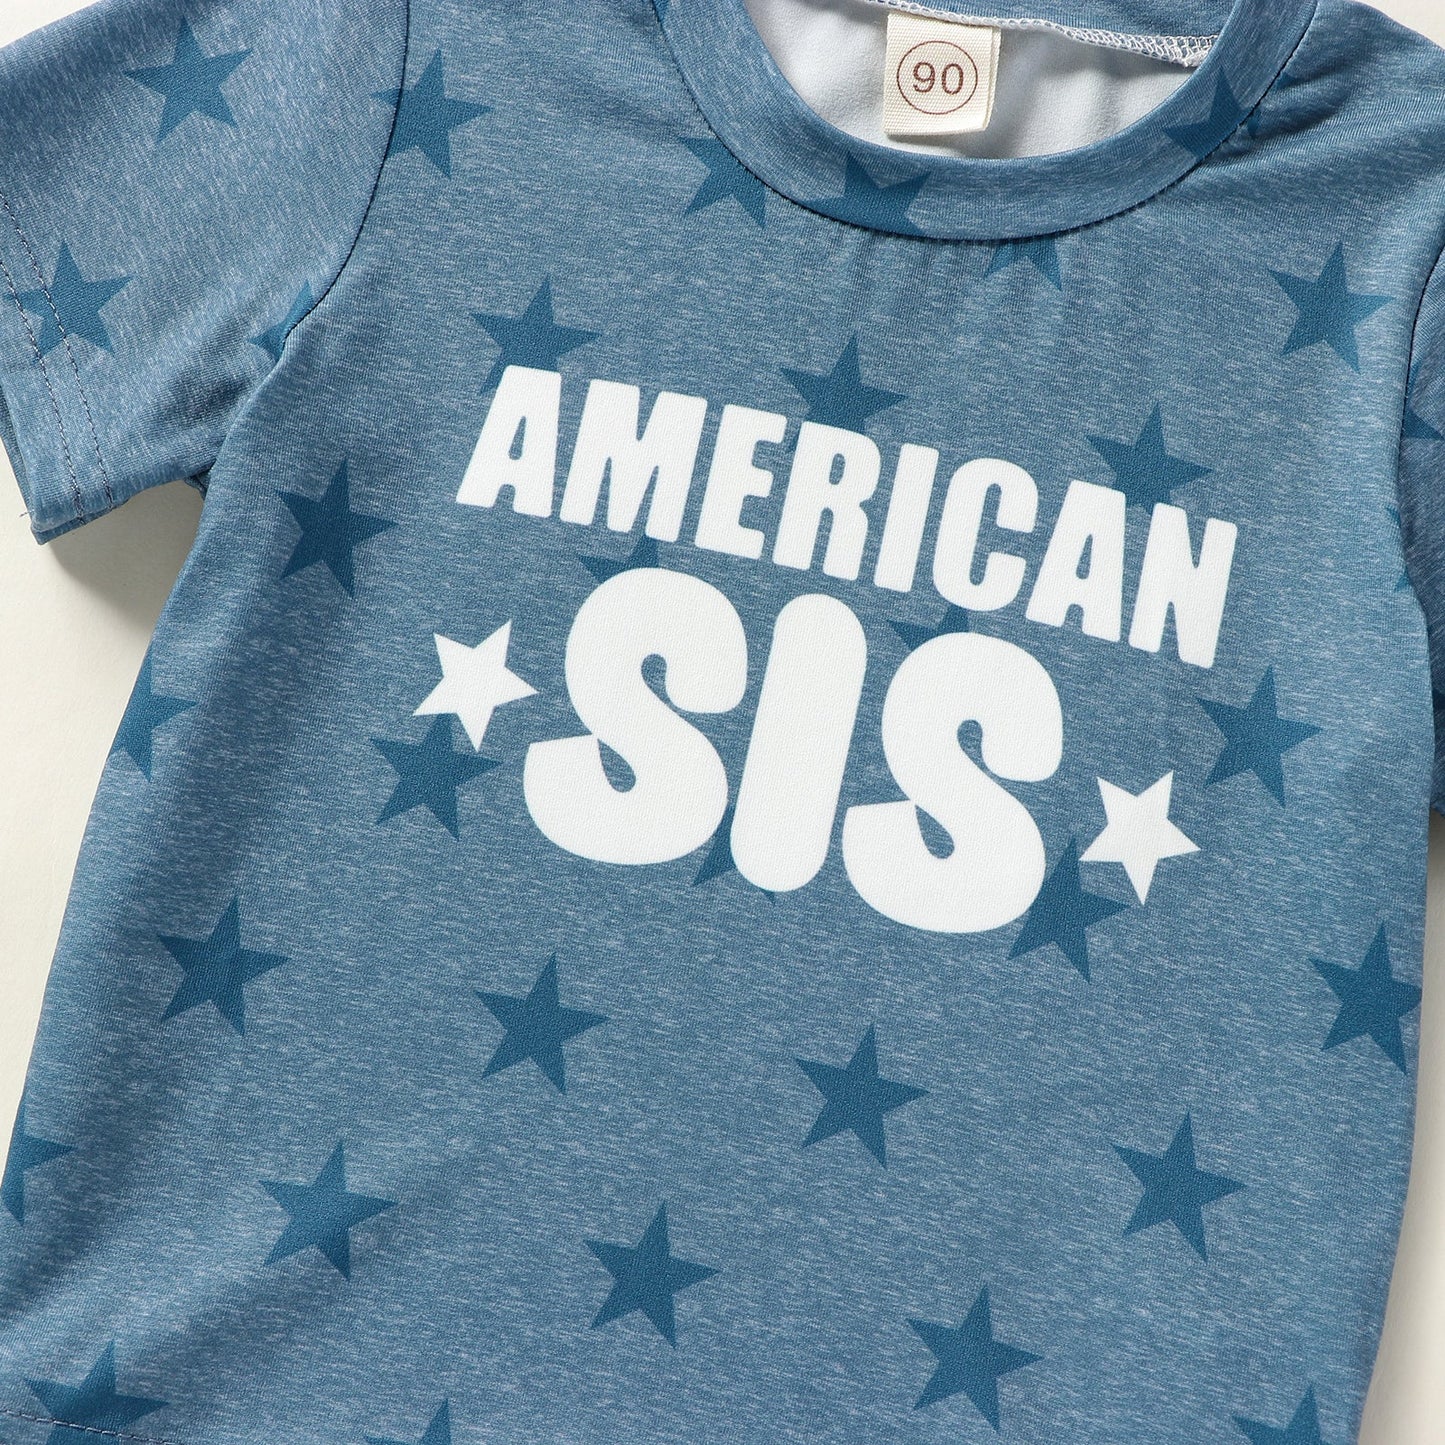 Baby Sibling Independence Day Sets